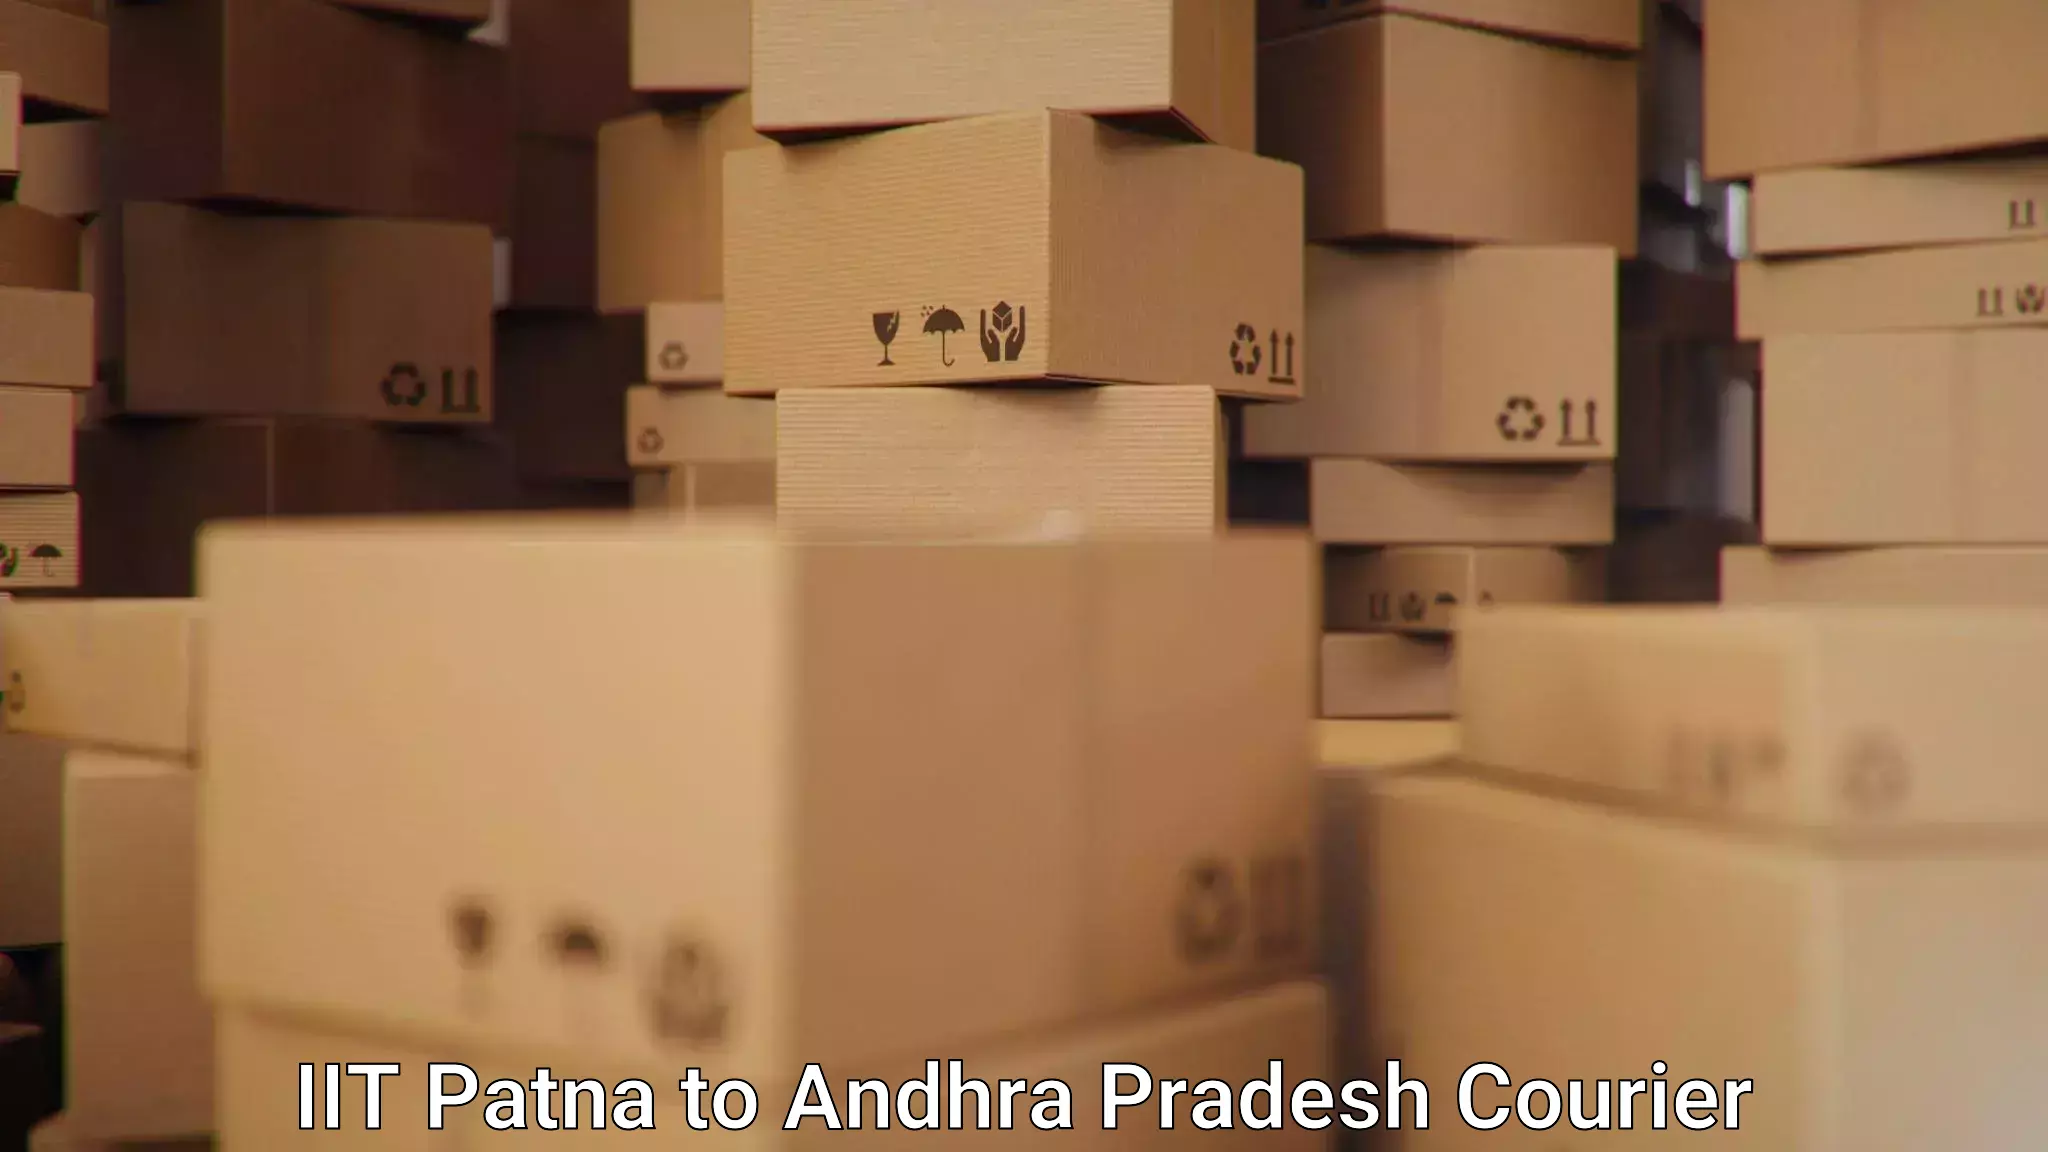 End-to-end delivery IIT Patna to Andhra Pradesh